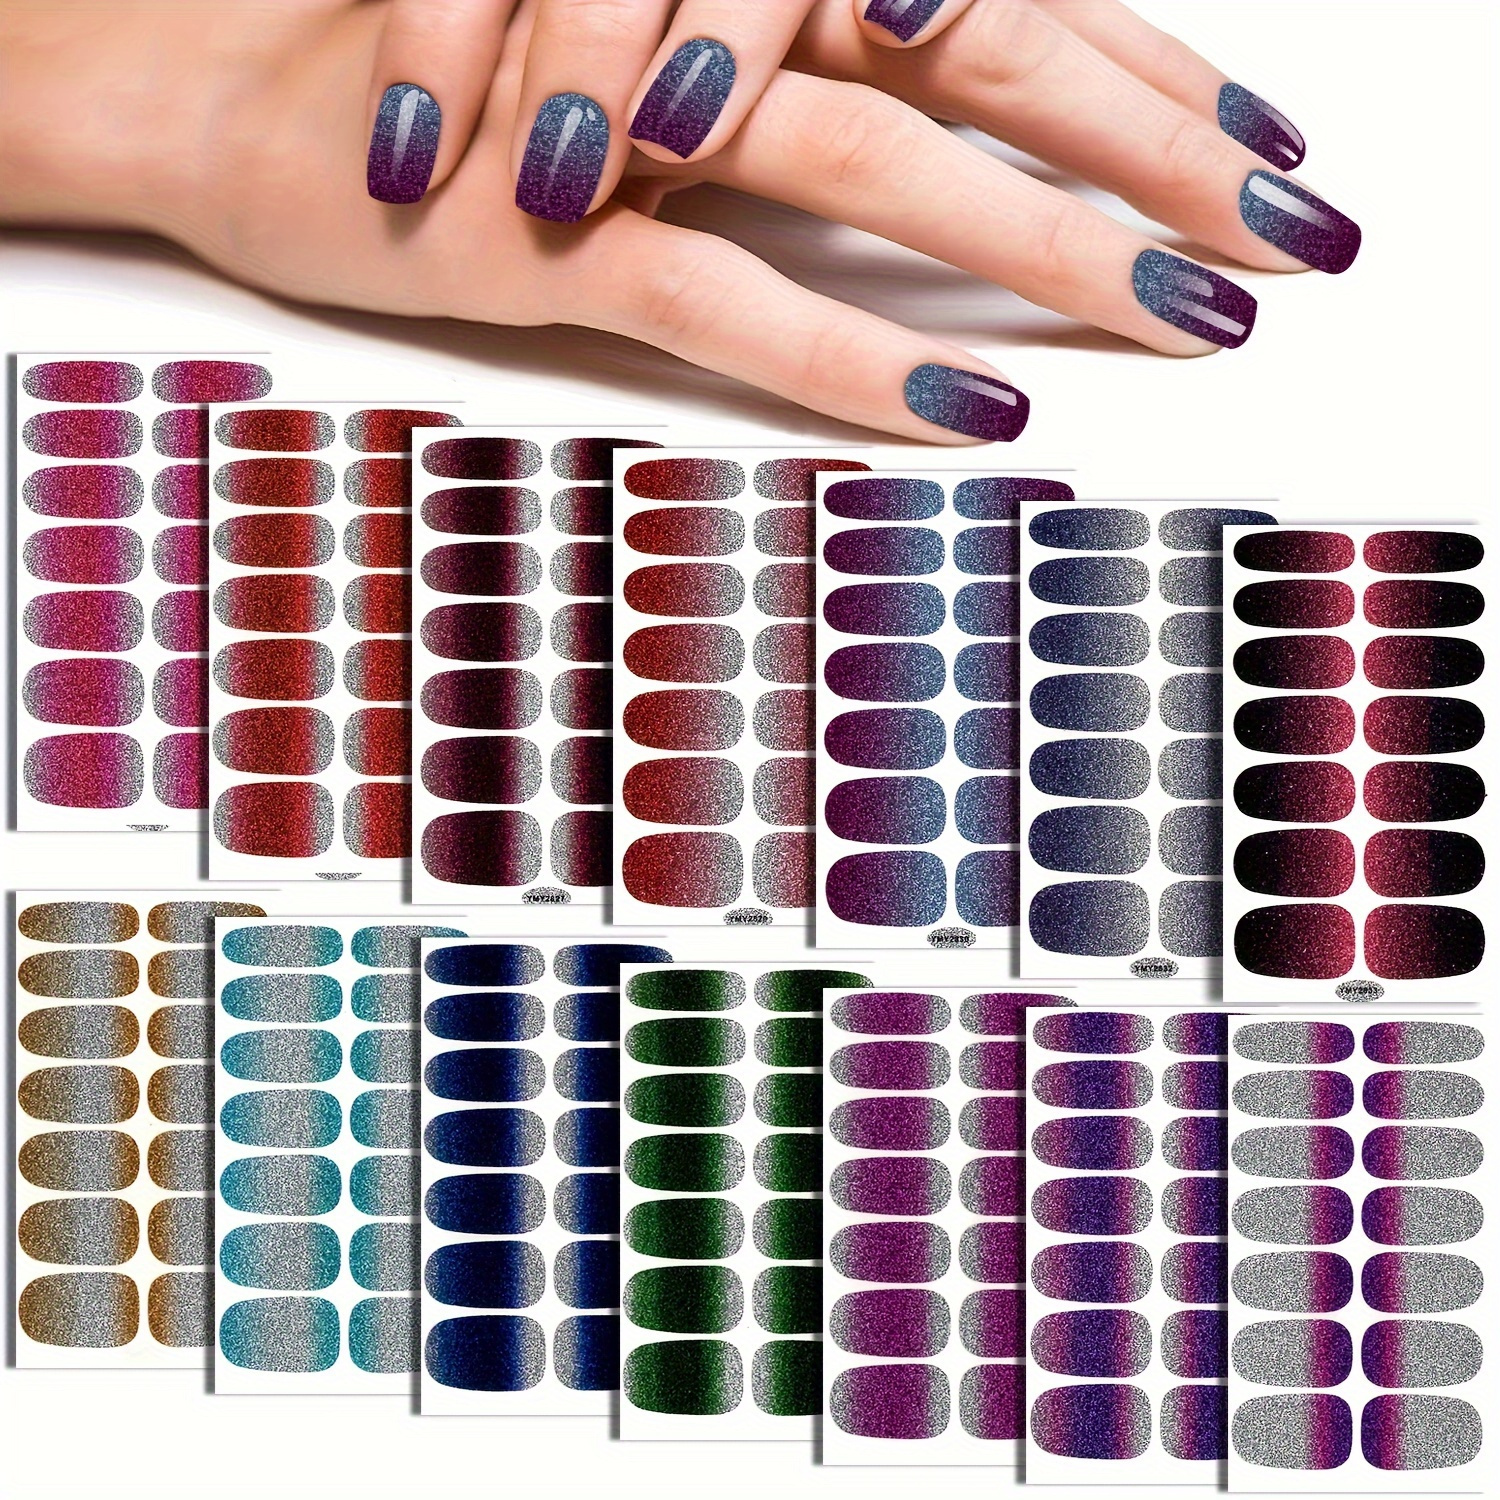 

14pcs Gradient Glitter Design Nail Art Stickers, Full Wrap Nail Art Decals With 6 Nail Files, Nail Art Supplies For Women And Girls